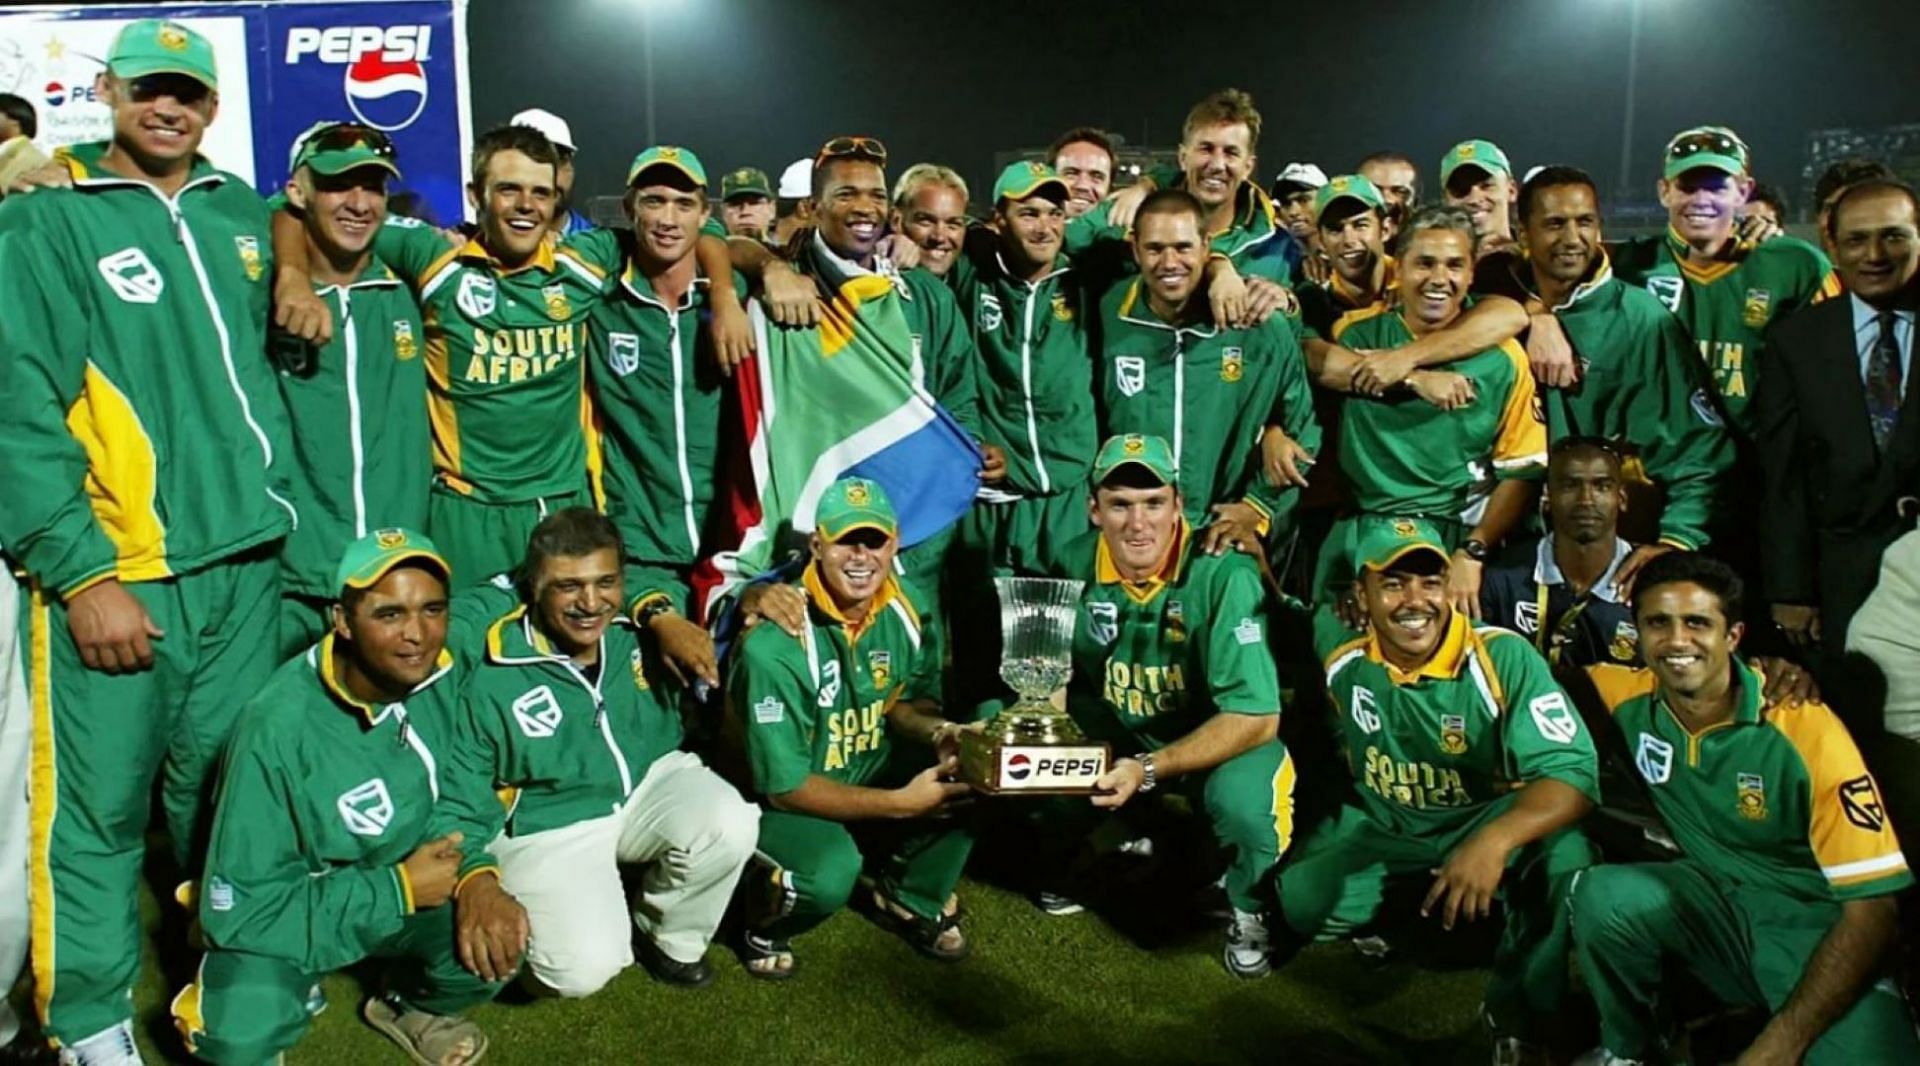 South Africa overcame hostile crowds in Pakistan to produce a staggering ODI series win.